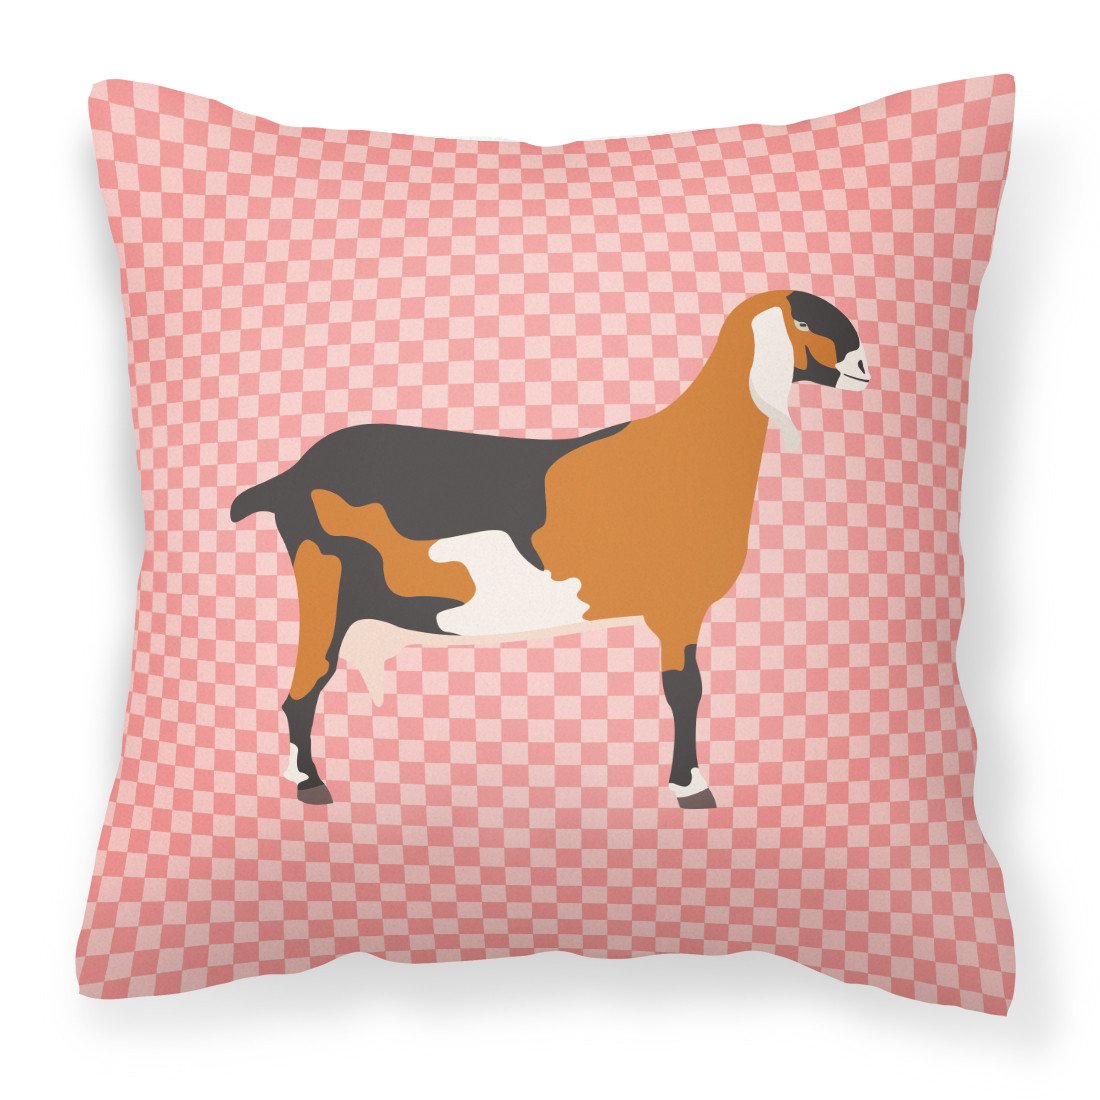 Anglo-nubian Nubian Goat Pink Check Fabric Decorative Pillow BB7883PW1818 by Caroline's Treasures